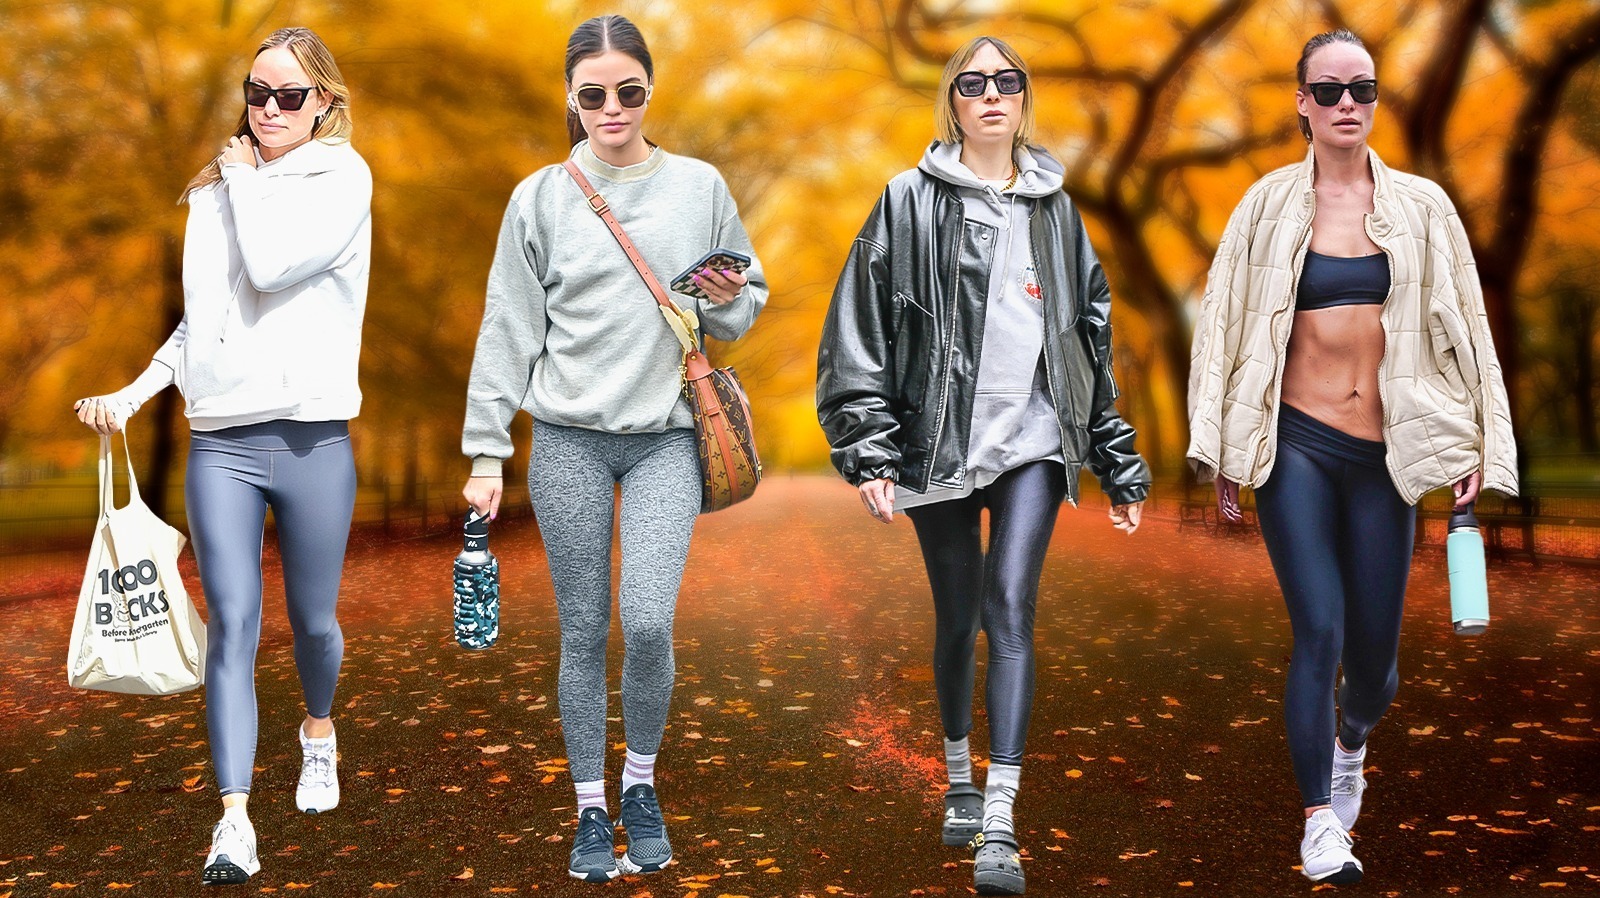 athleisure running and walking outfits for fall including alo